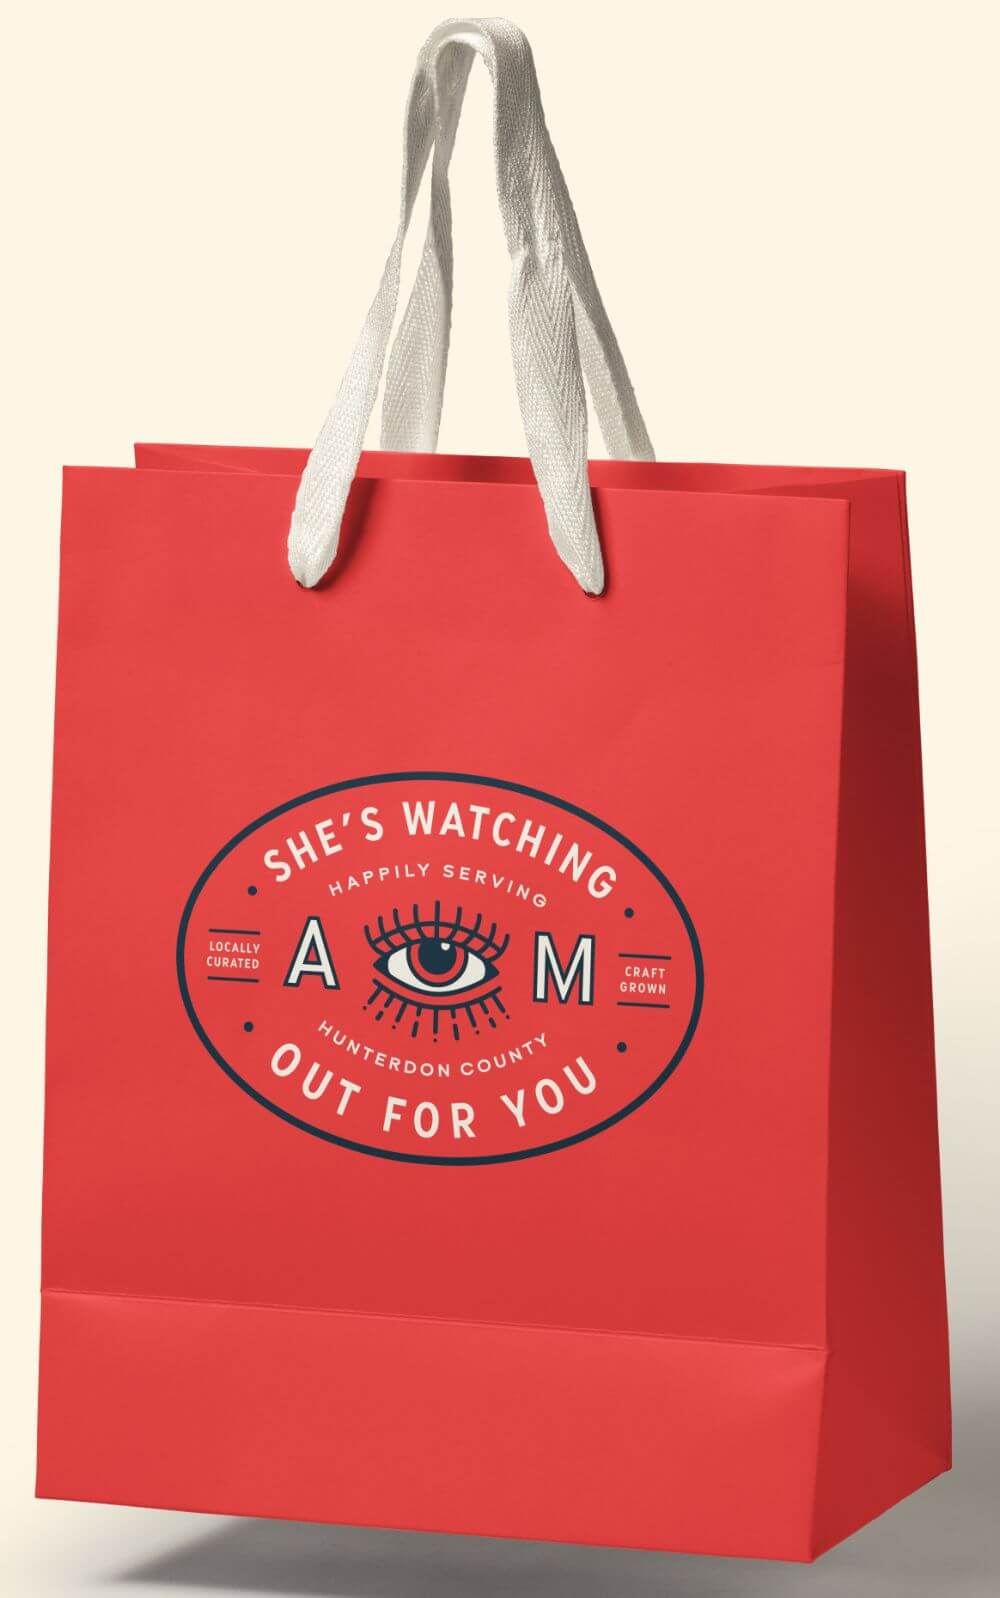 Aunt Mary's | To-Go Bag Design for Cannabis